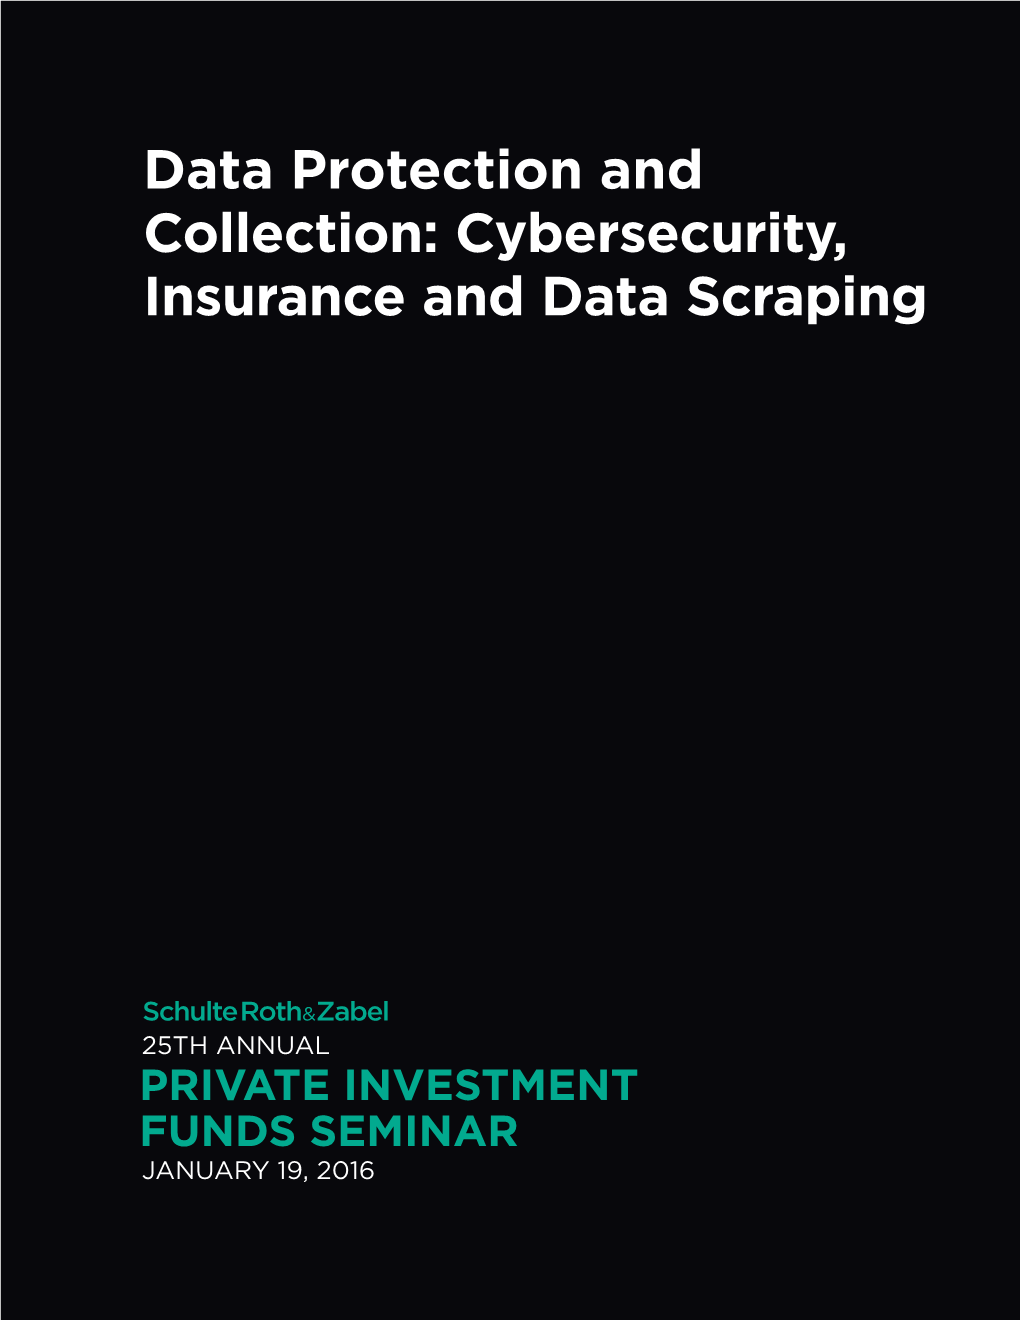 Data Protection and Collection: Cybersecurity, Insurance and Data Scraping